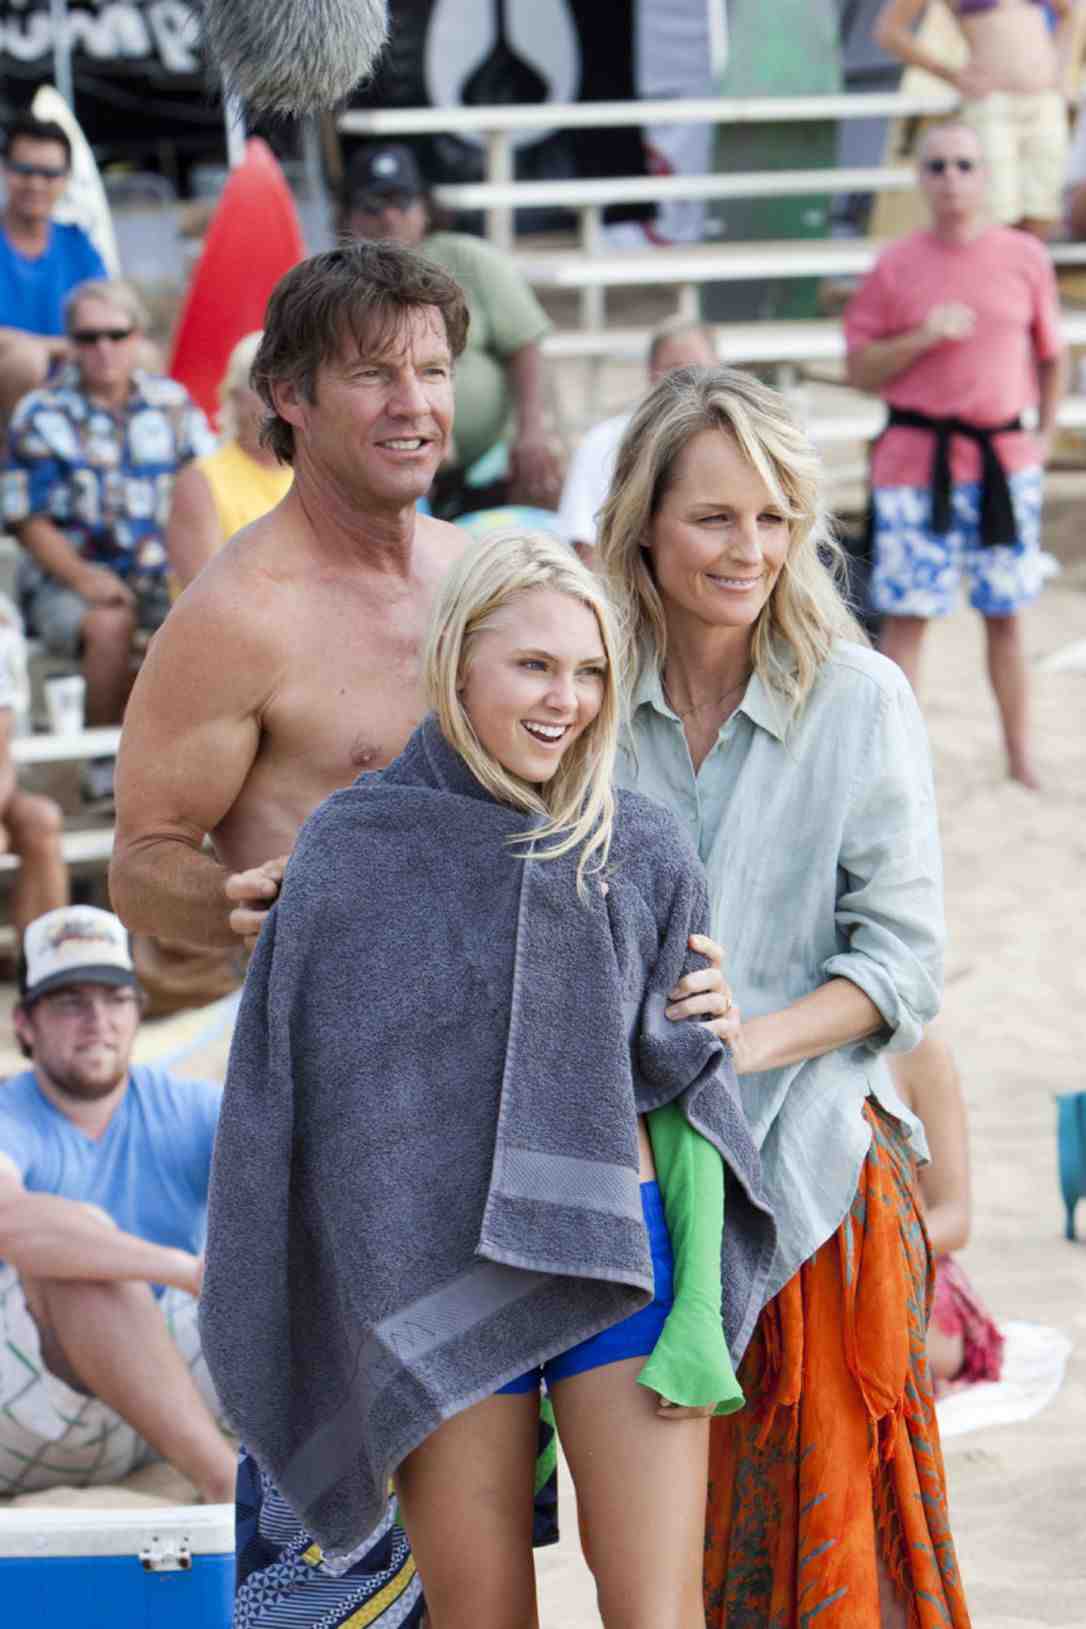 Who is Malina in Soul Surfer?